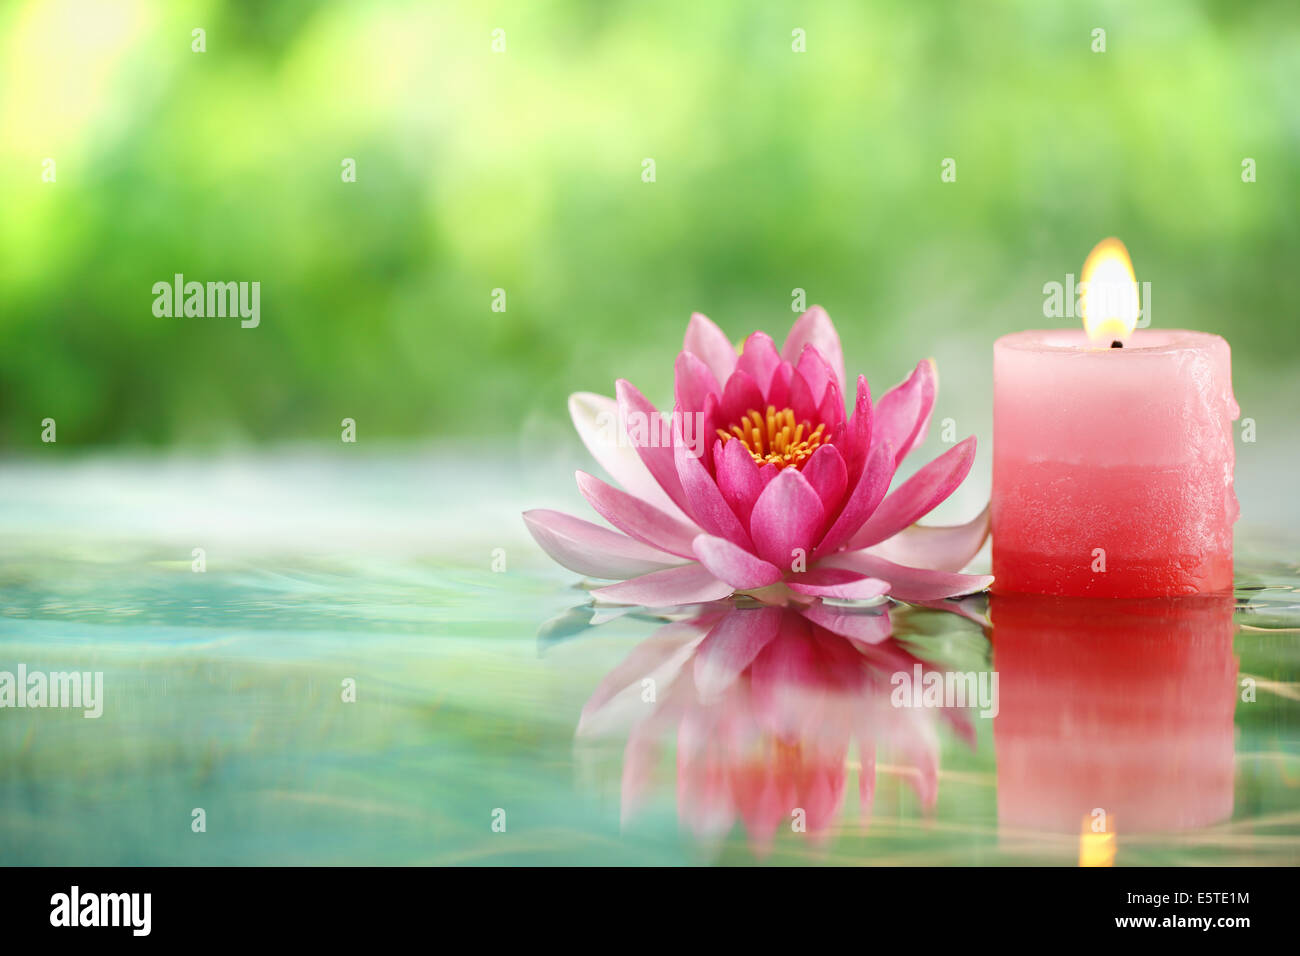 Burning candle and water lily in water. Stock Photo